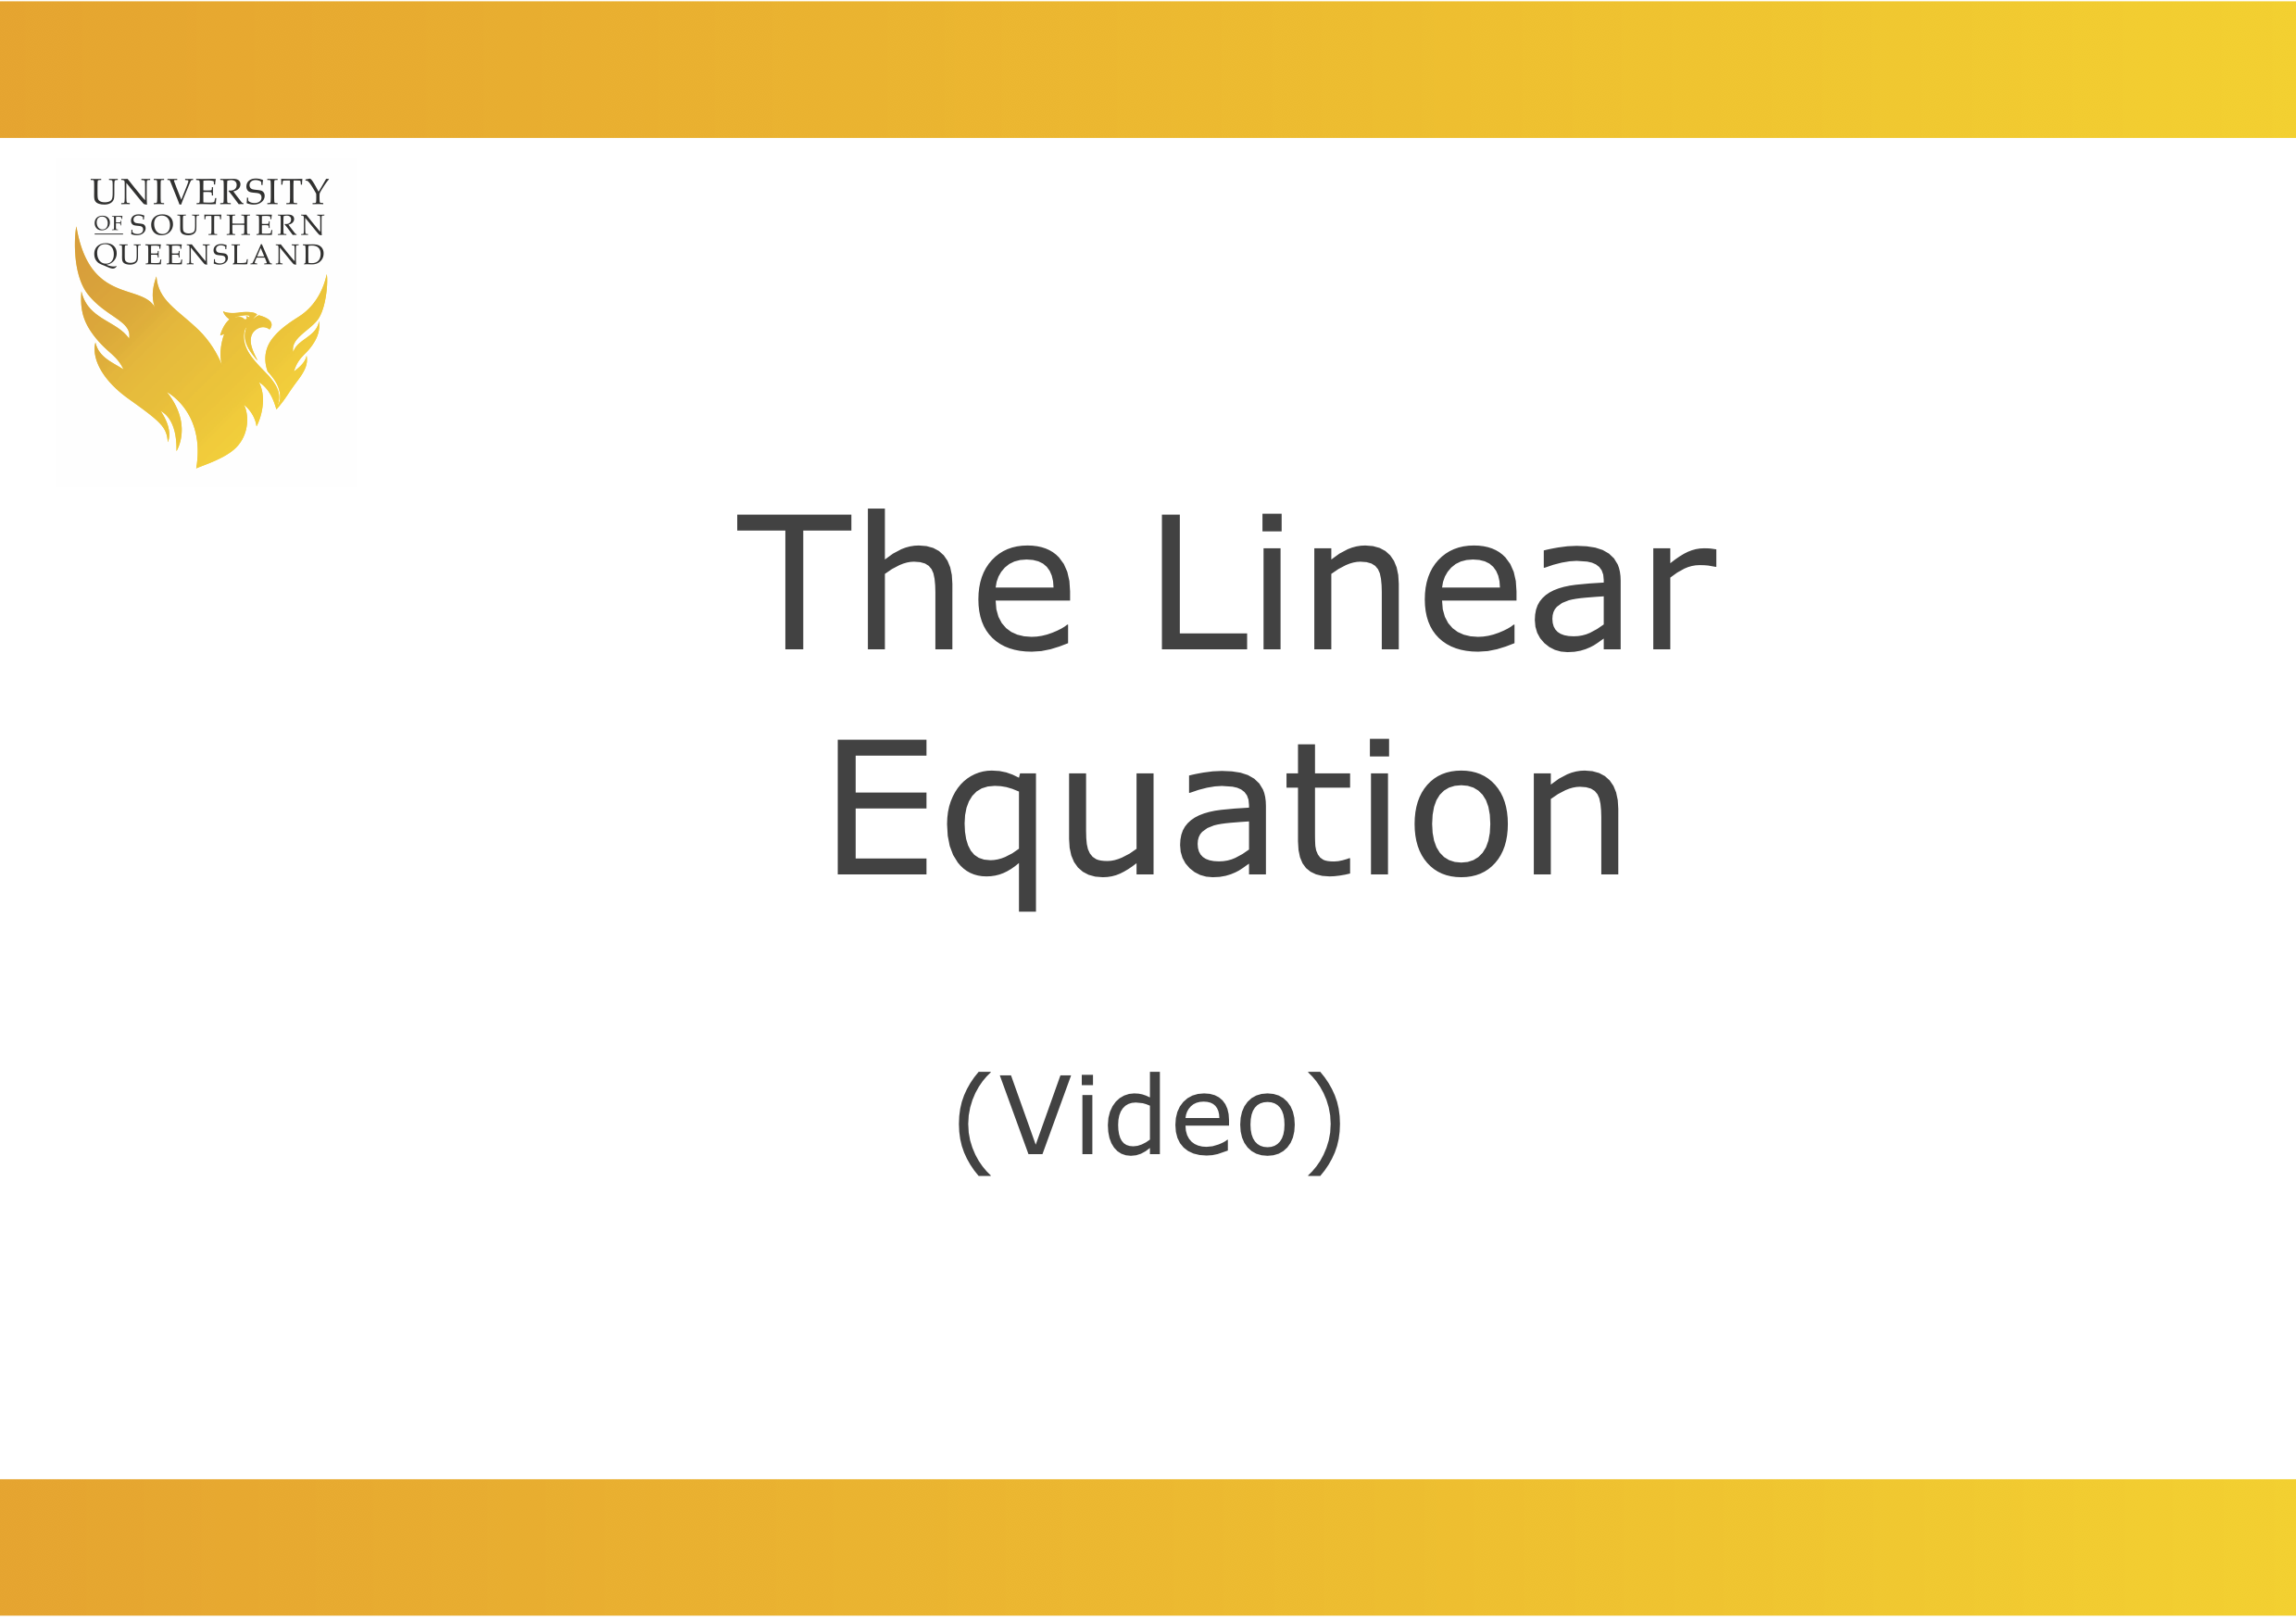 image to play the video for The Linear Equation